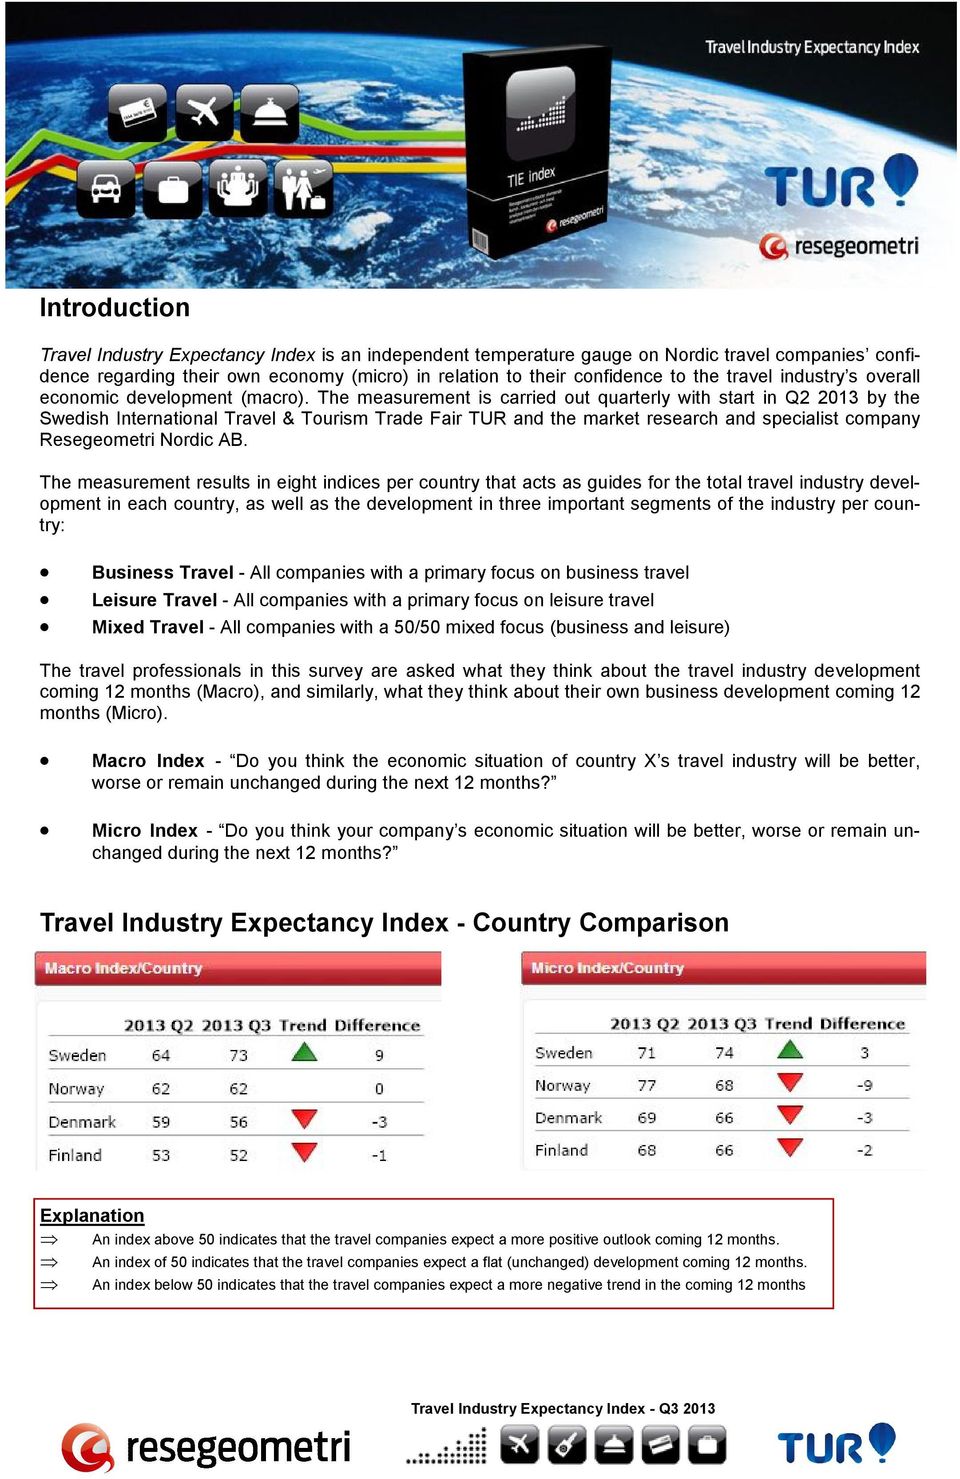 The measurement is carried out quarterly with start in Q2 2013 by the Swedish International Travel & Tourism Trade Fair TUR and the market research and specialist company Resegeometri Nordic AB.